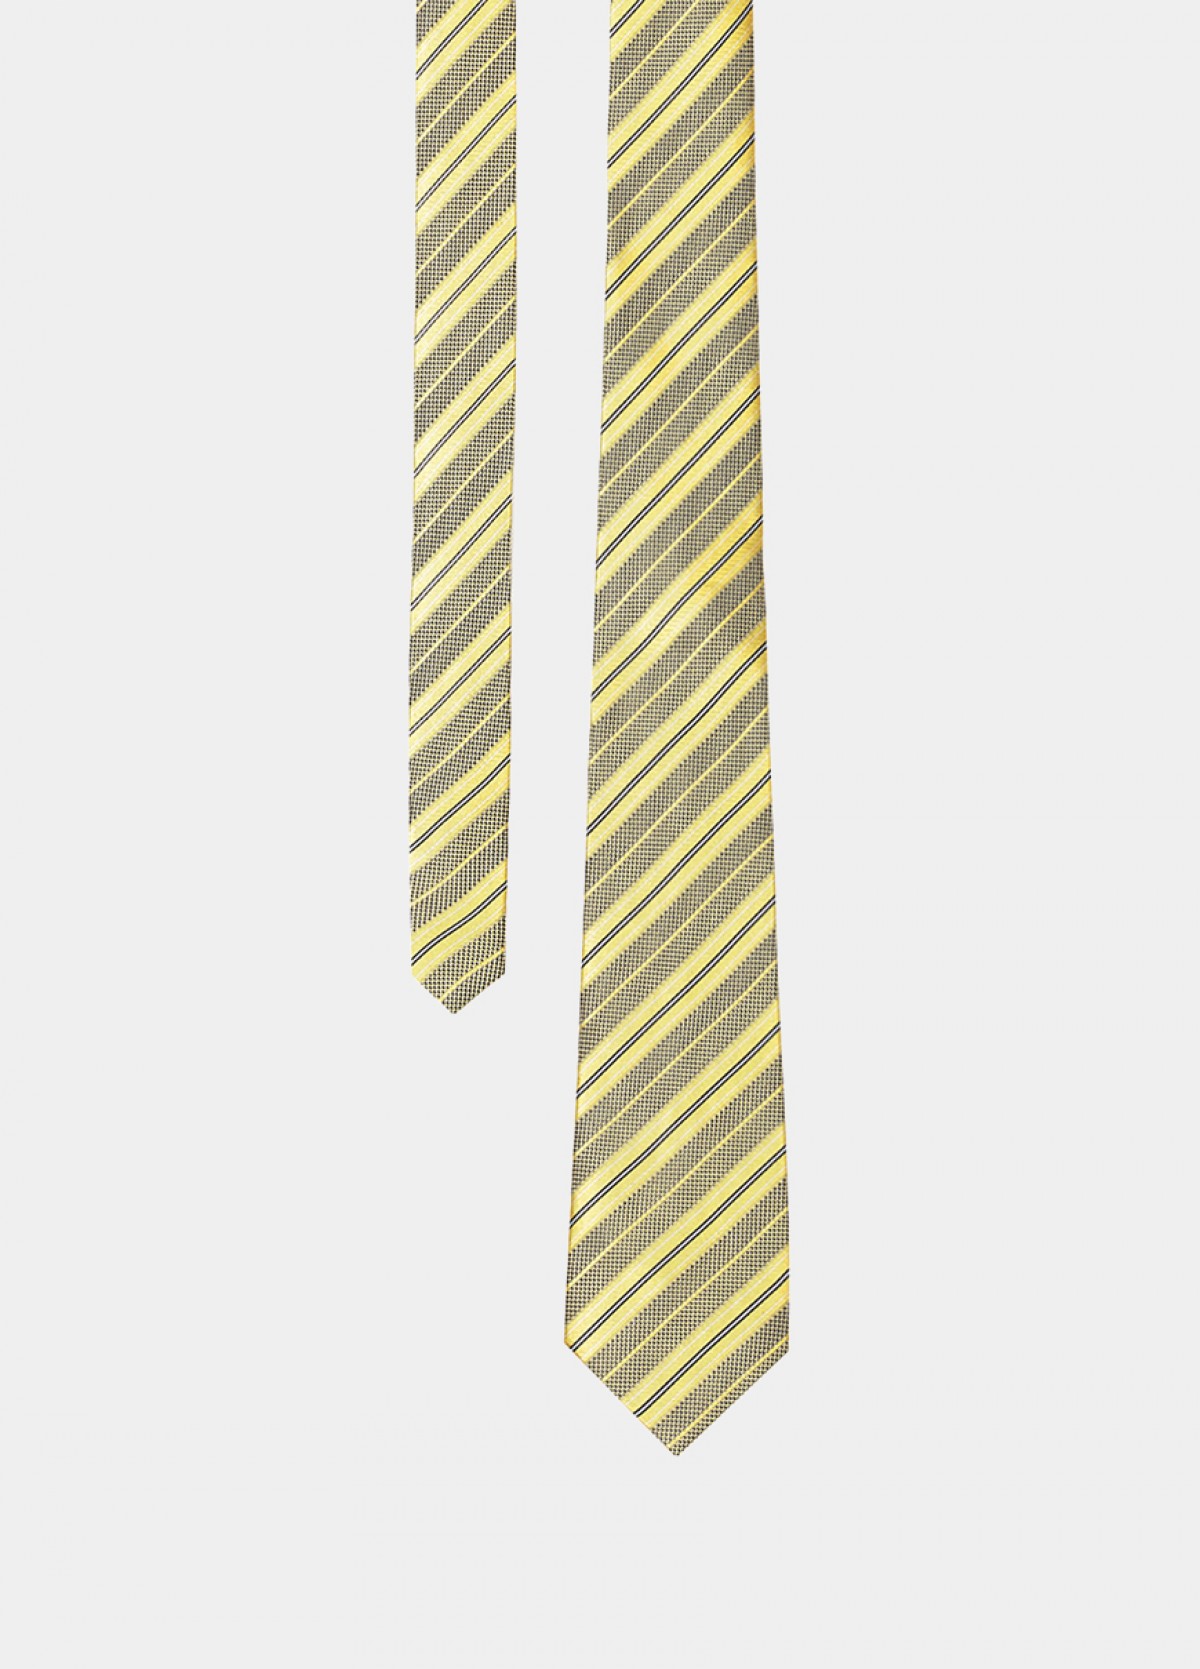 The Yellow Stain Resistant Tie